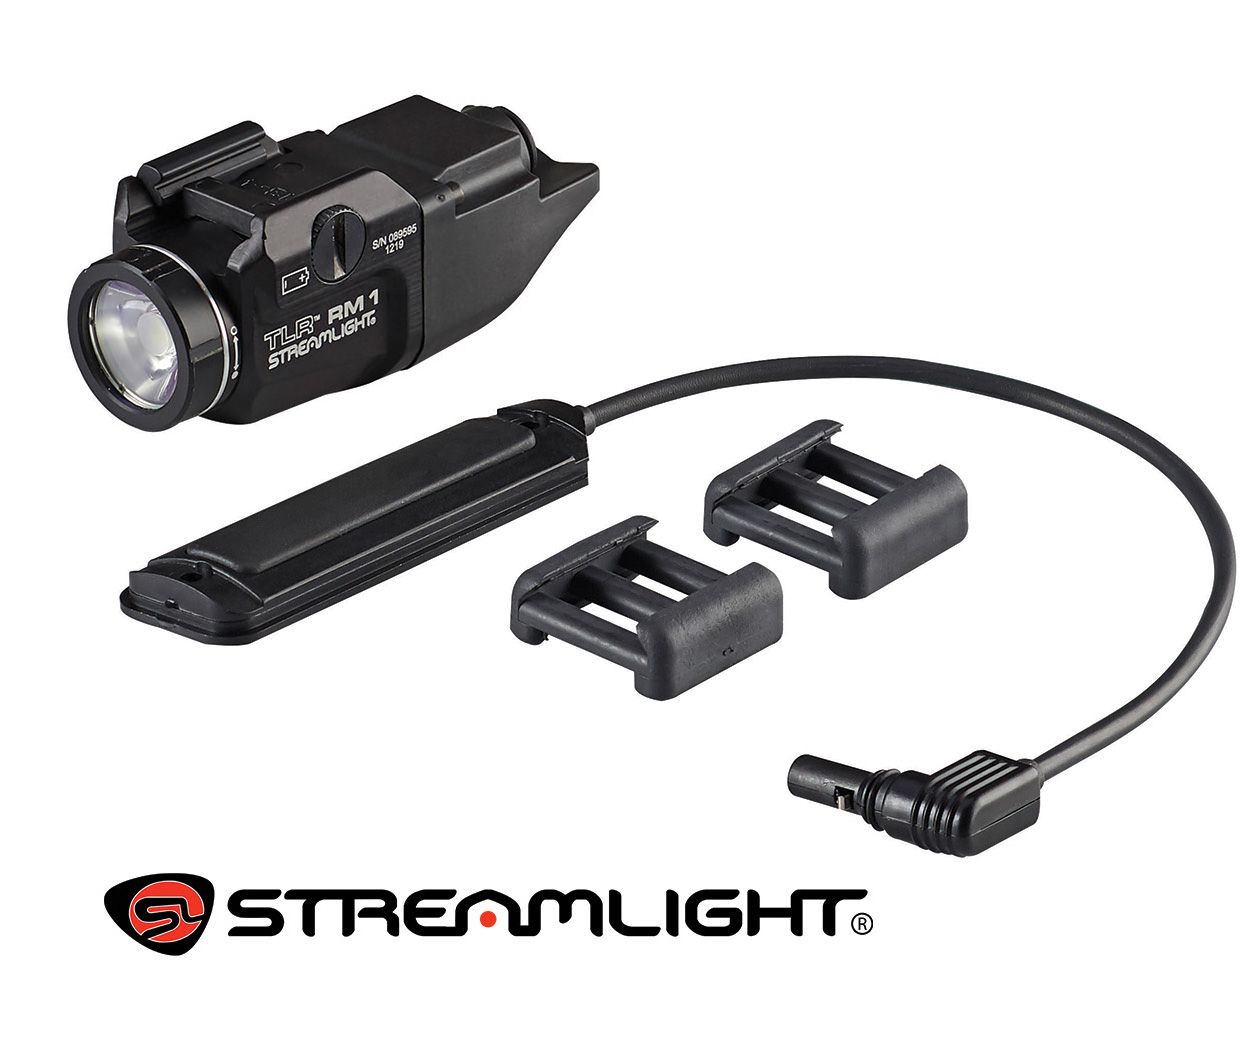 Black for sale online Streamlight 69441 Rail-Mounted Tactical Lighting System 